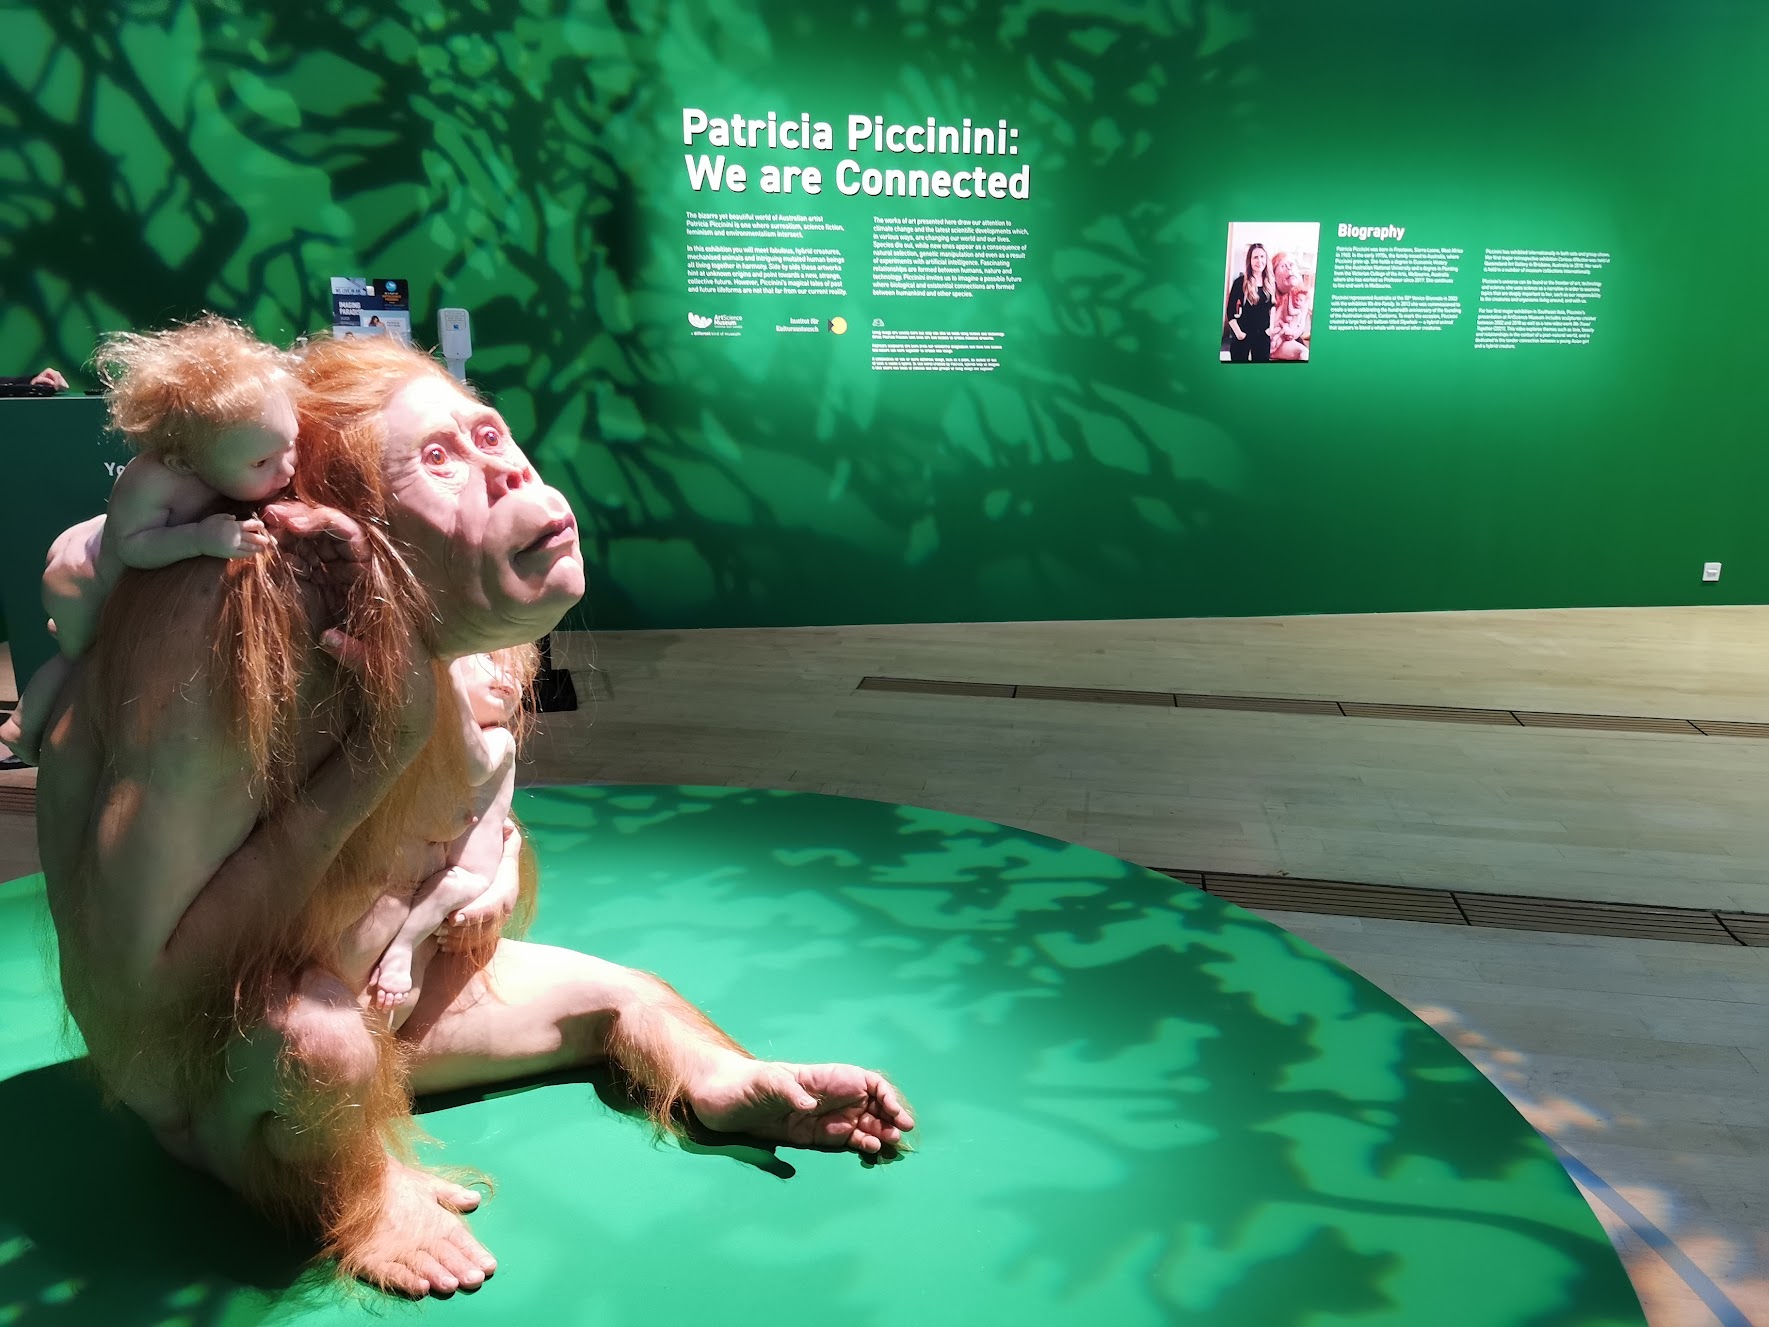 We Are Connected by Patricia Piccinini